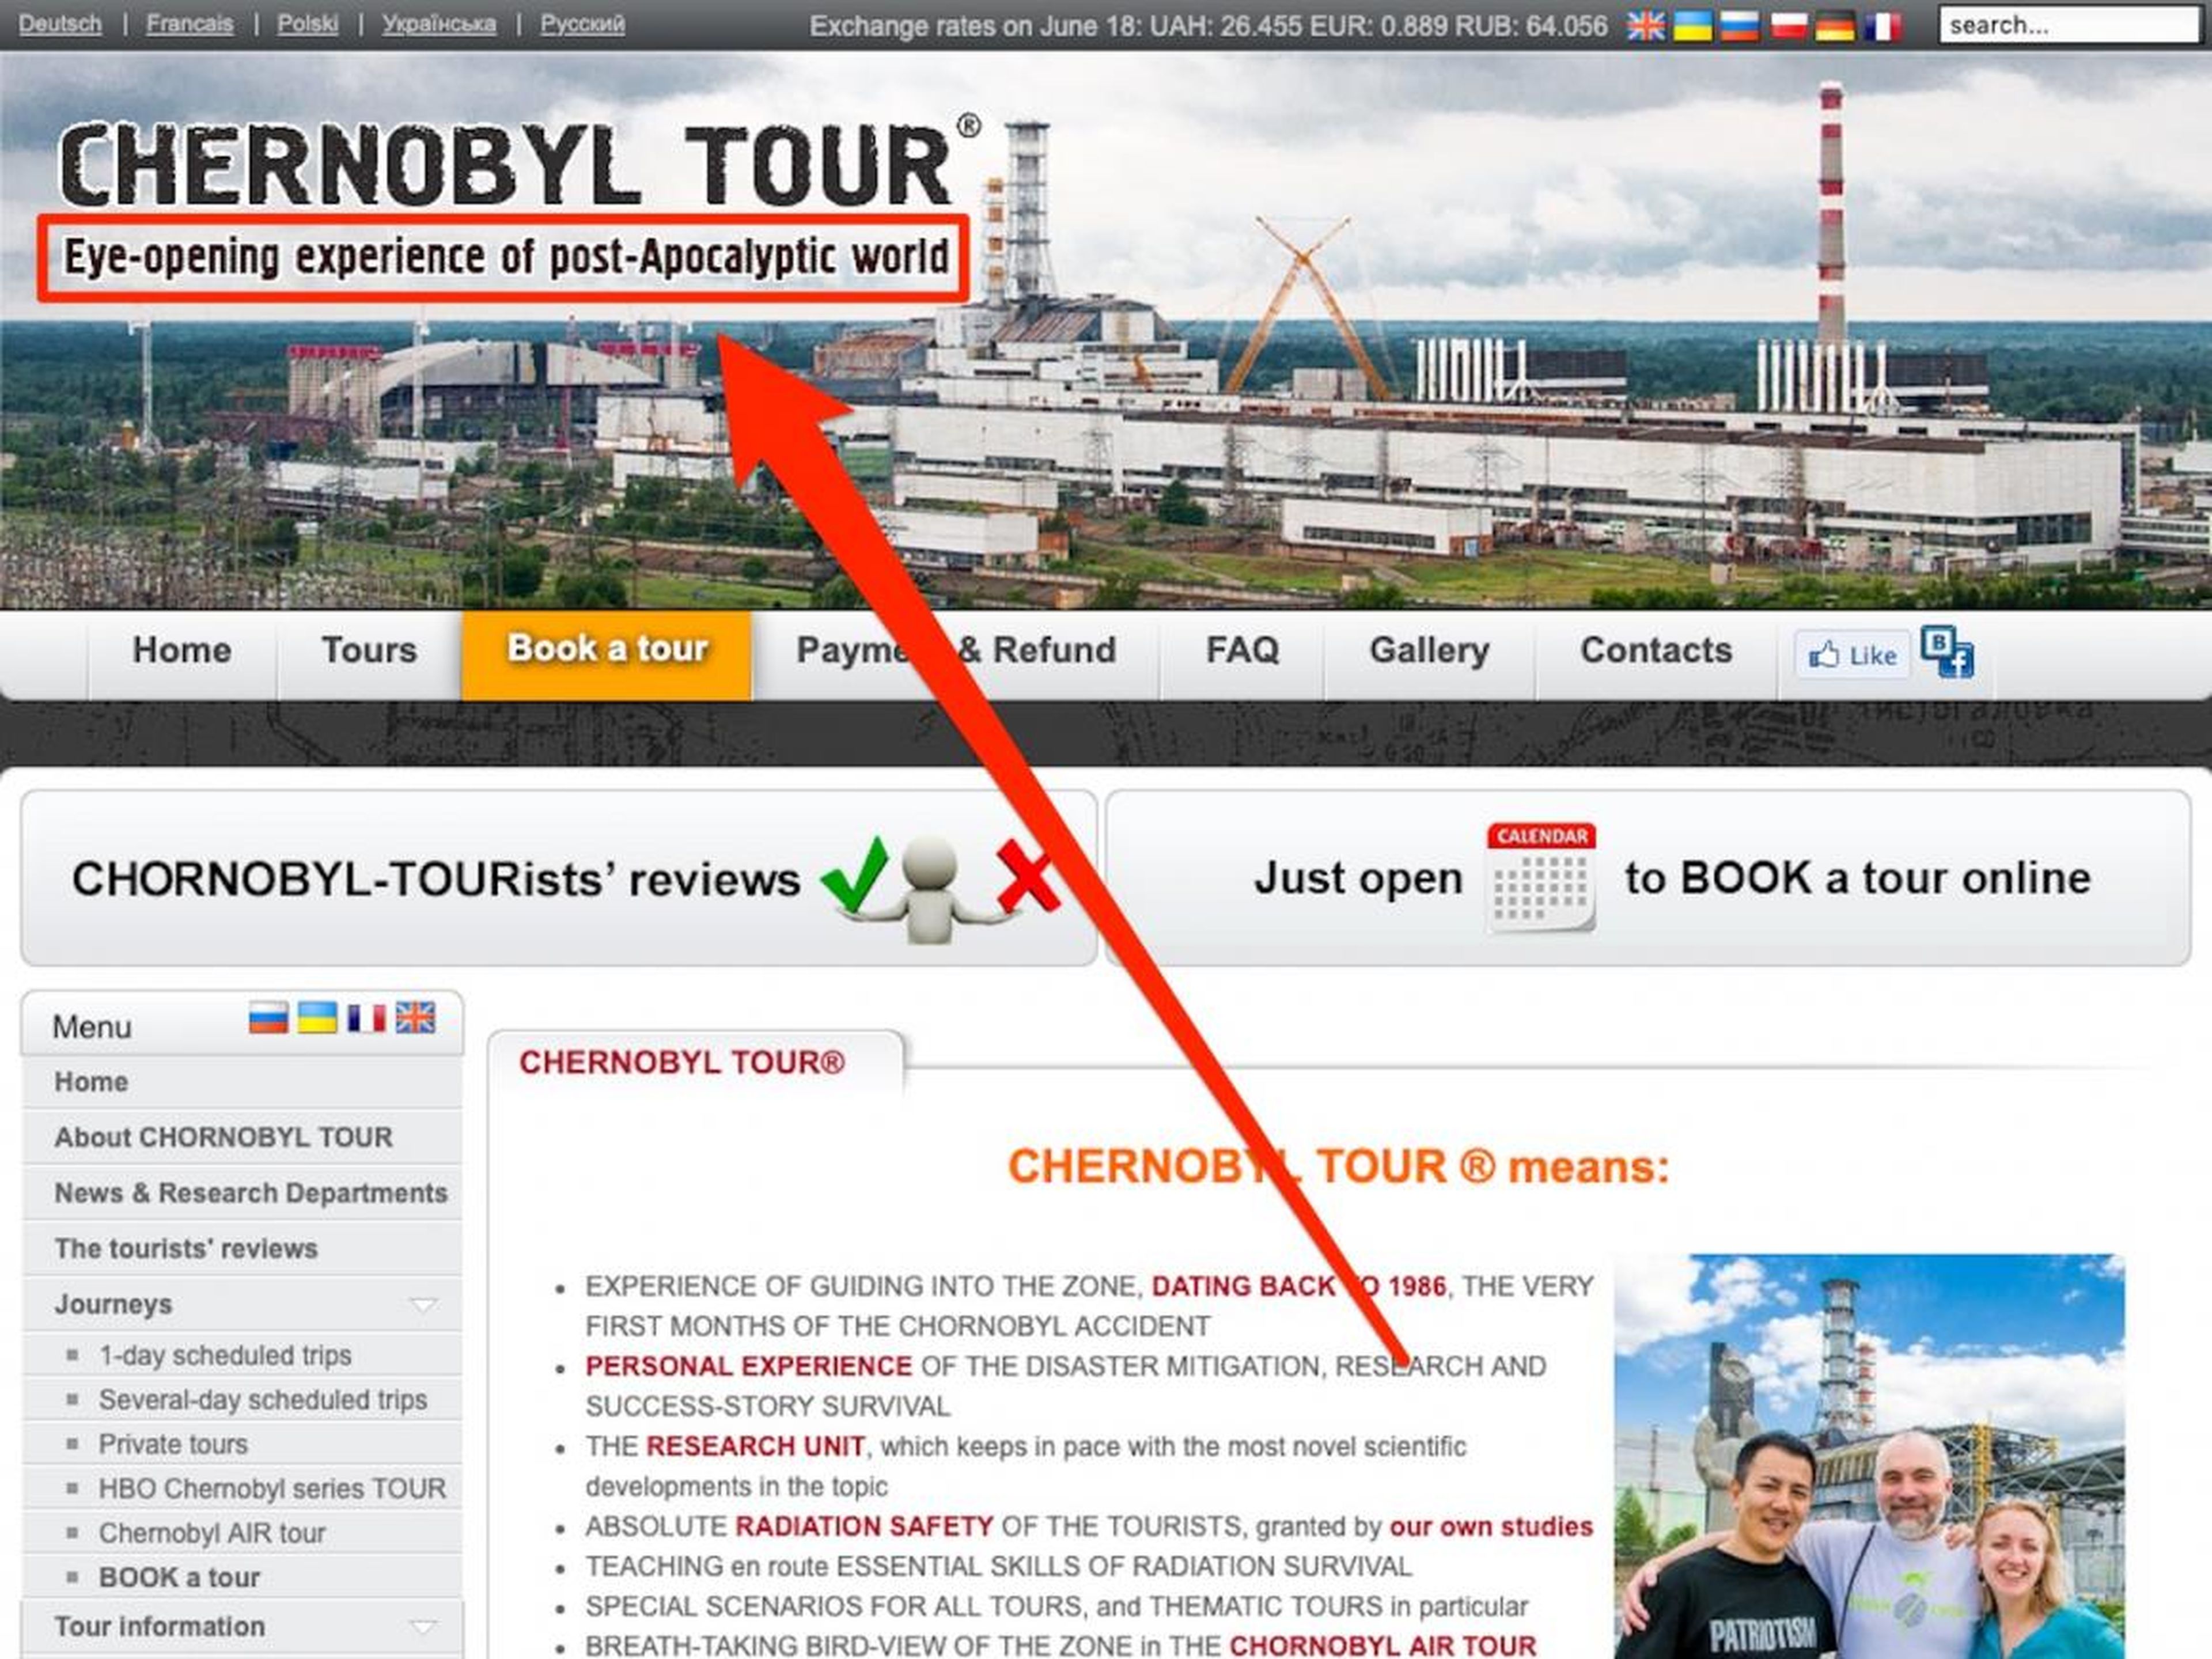 The guided tour company SoloEast has been taking visitors into Chernobyl since 2000, according to CNN. And the website for Chernobyl Tour advertises an "eye-opening experience of post-apocalyptic world."